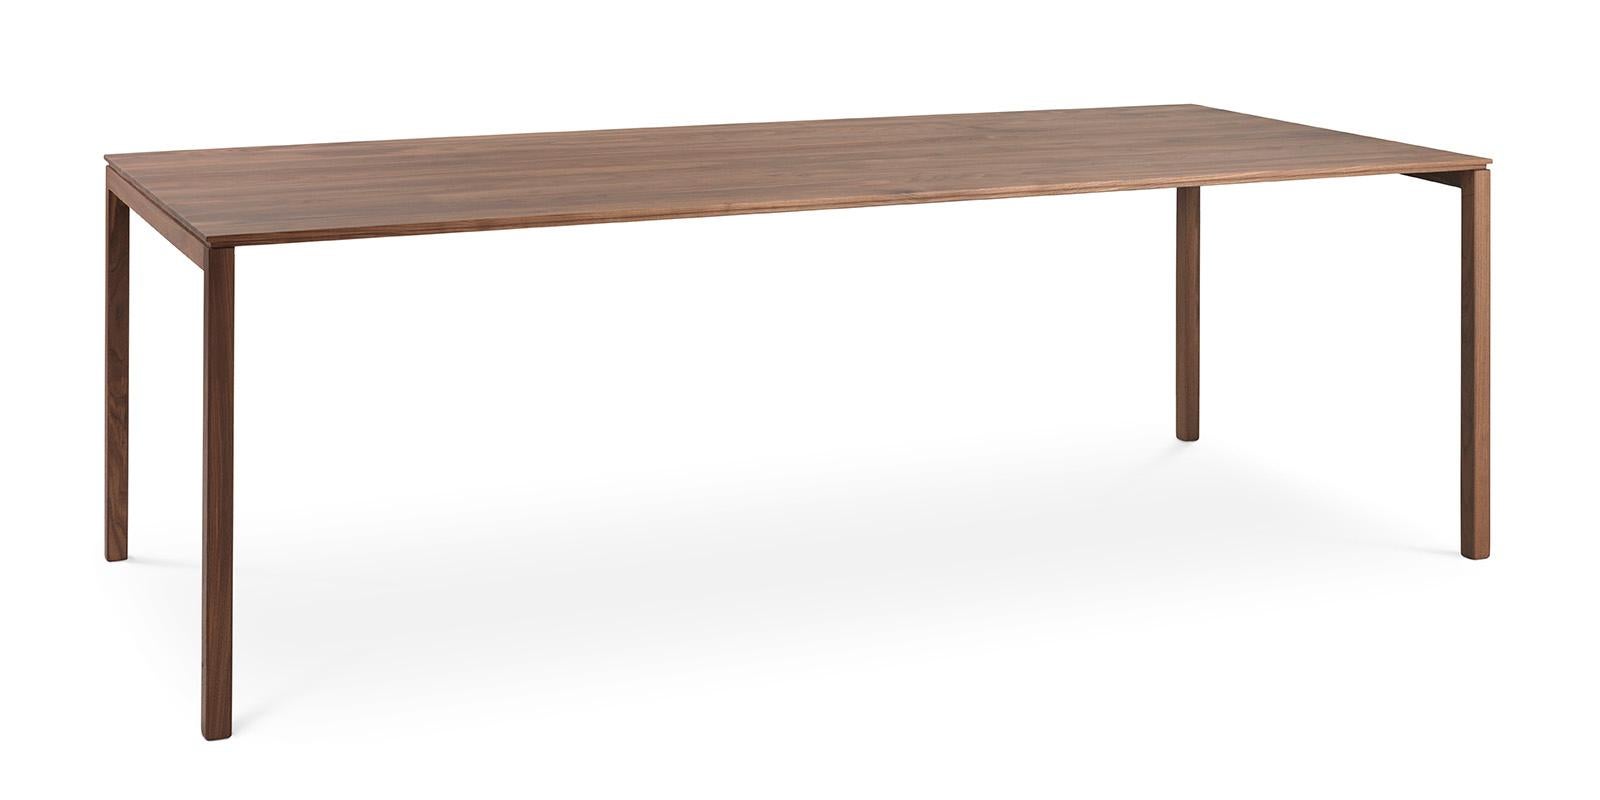 This massive table has been stripped of almost everything that is unnecessary. The legs are very refined and on the long sides it seems as if the top is not supported. Due to the clever subcutaneous metal construction, this table can be made up to